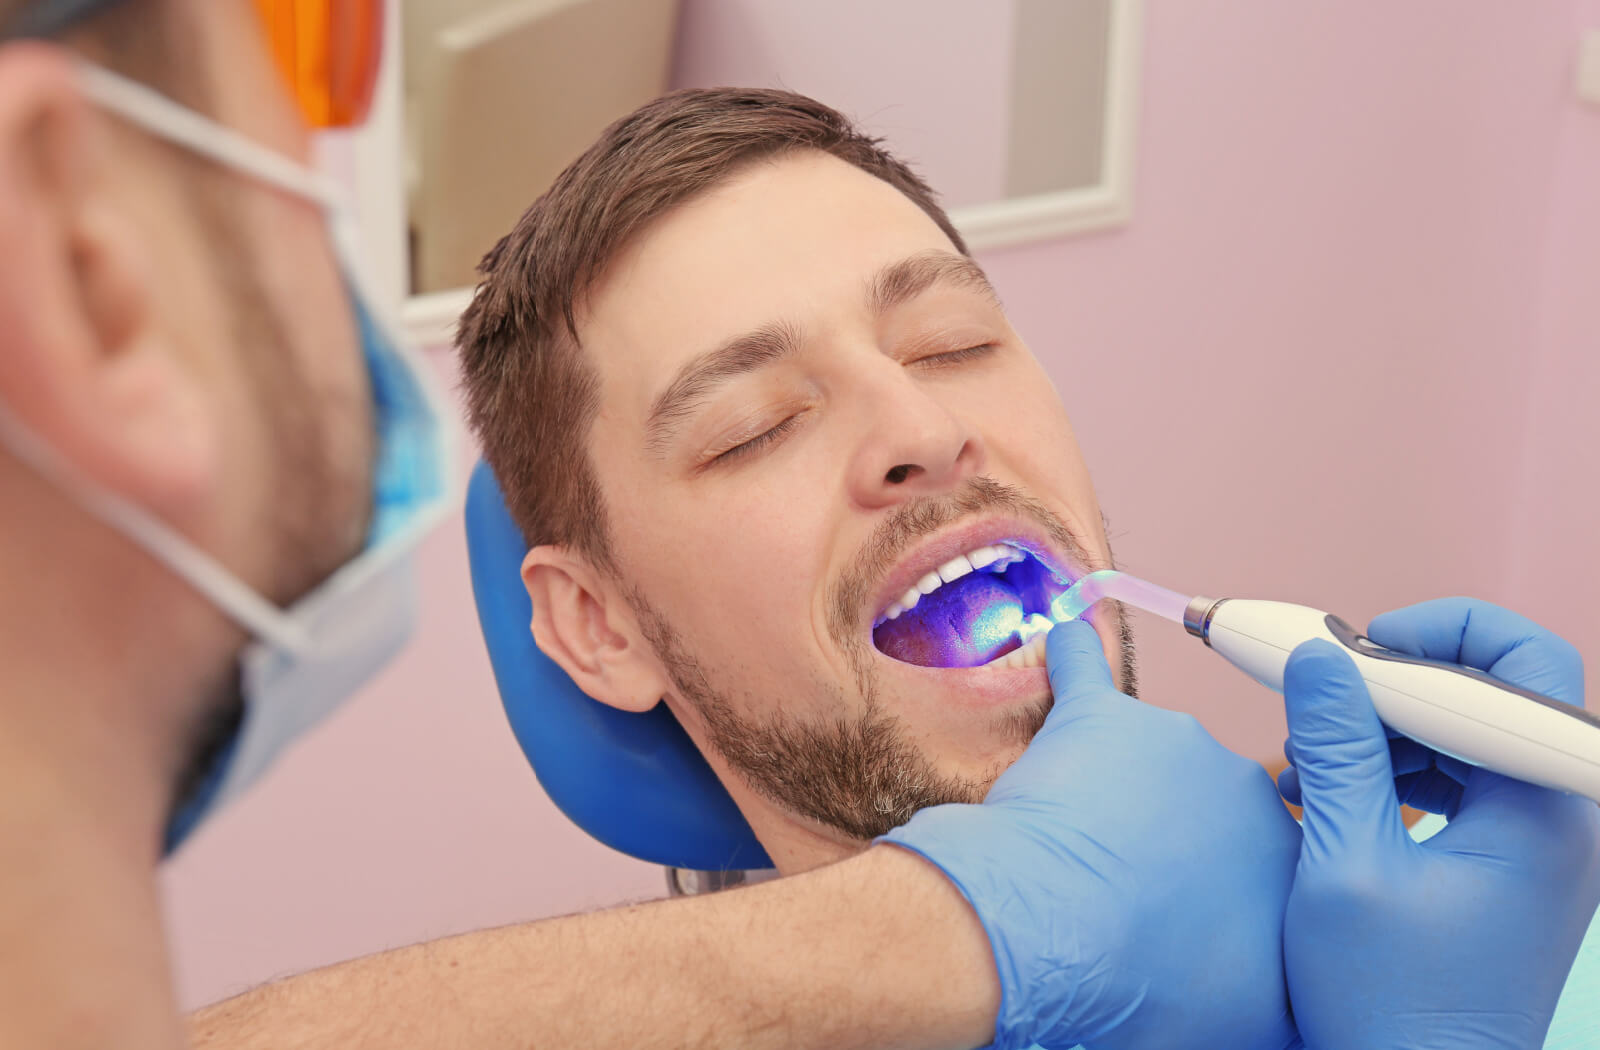 A dentist is doing a tooth filling on a male patient using alternative materials for fillings, such as composite resin, to reduce exposure to toxins.